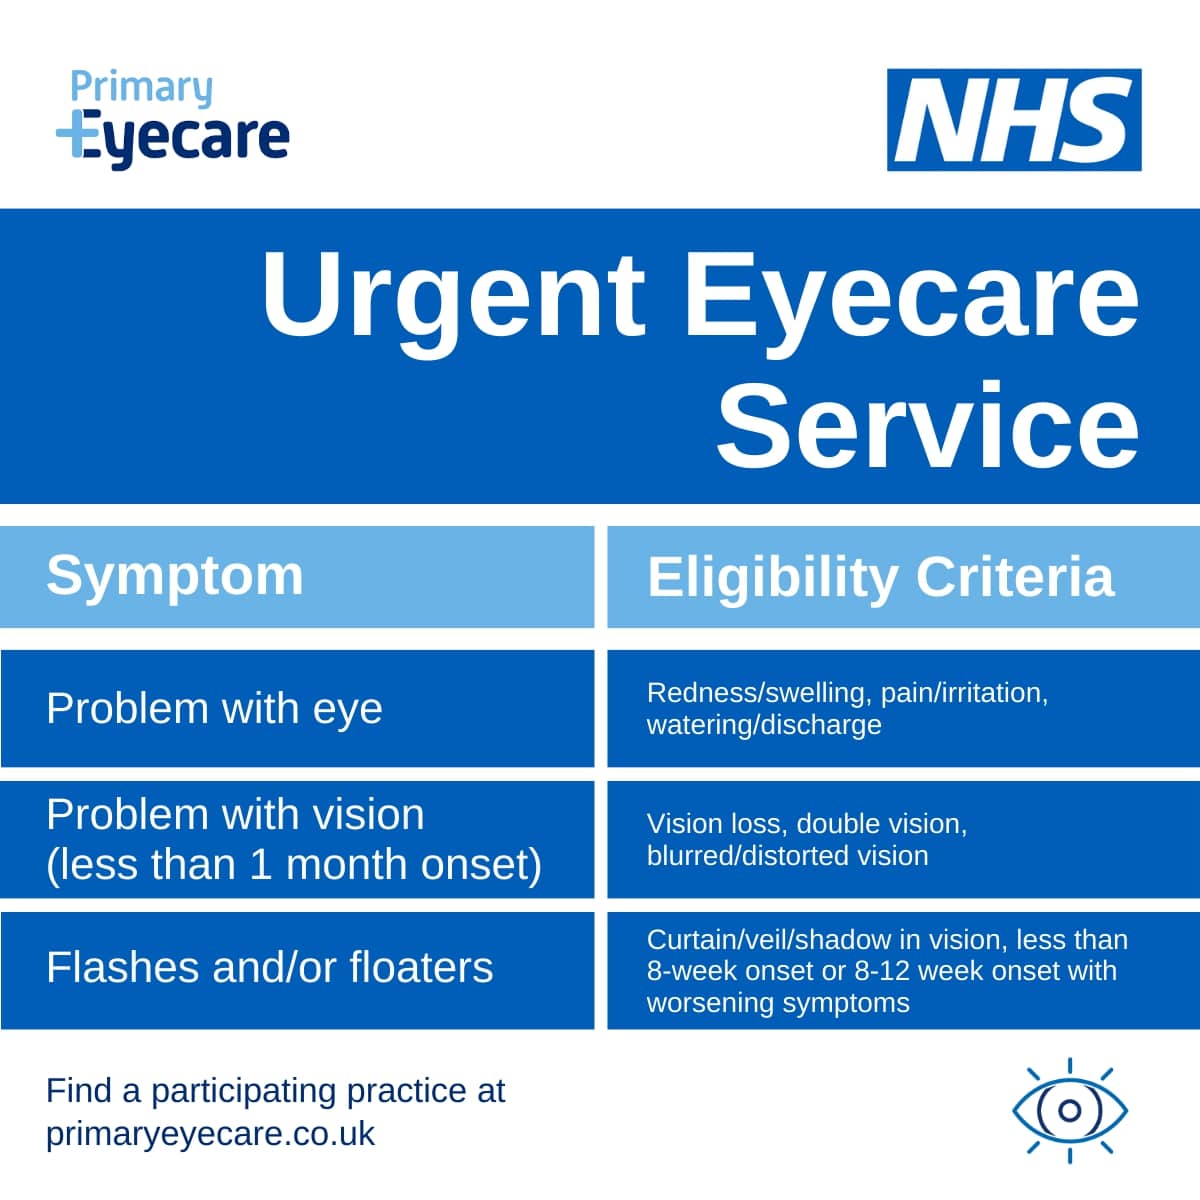 👁️ Experiencing sudden eye issues? Contact our Community Urgent Eyecare Service (CUES) if you have redness, pain, flashes, or floaters for an assessment and treatment. No GP referral needed. Learn more: orlo.uk/V9PDd